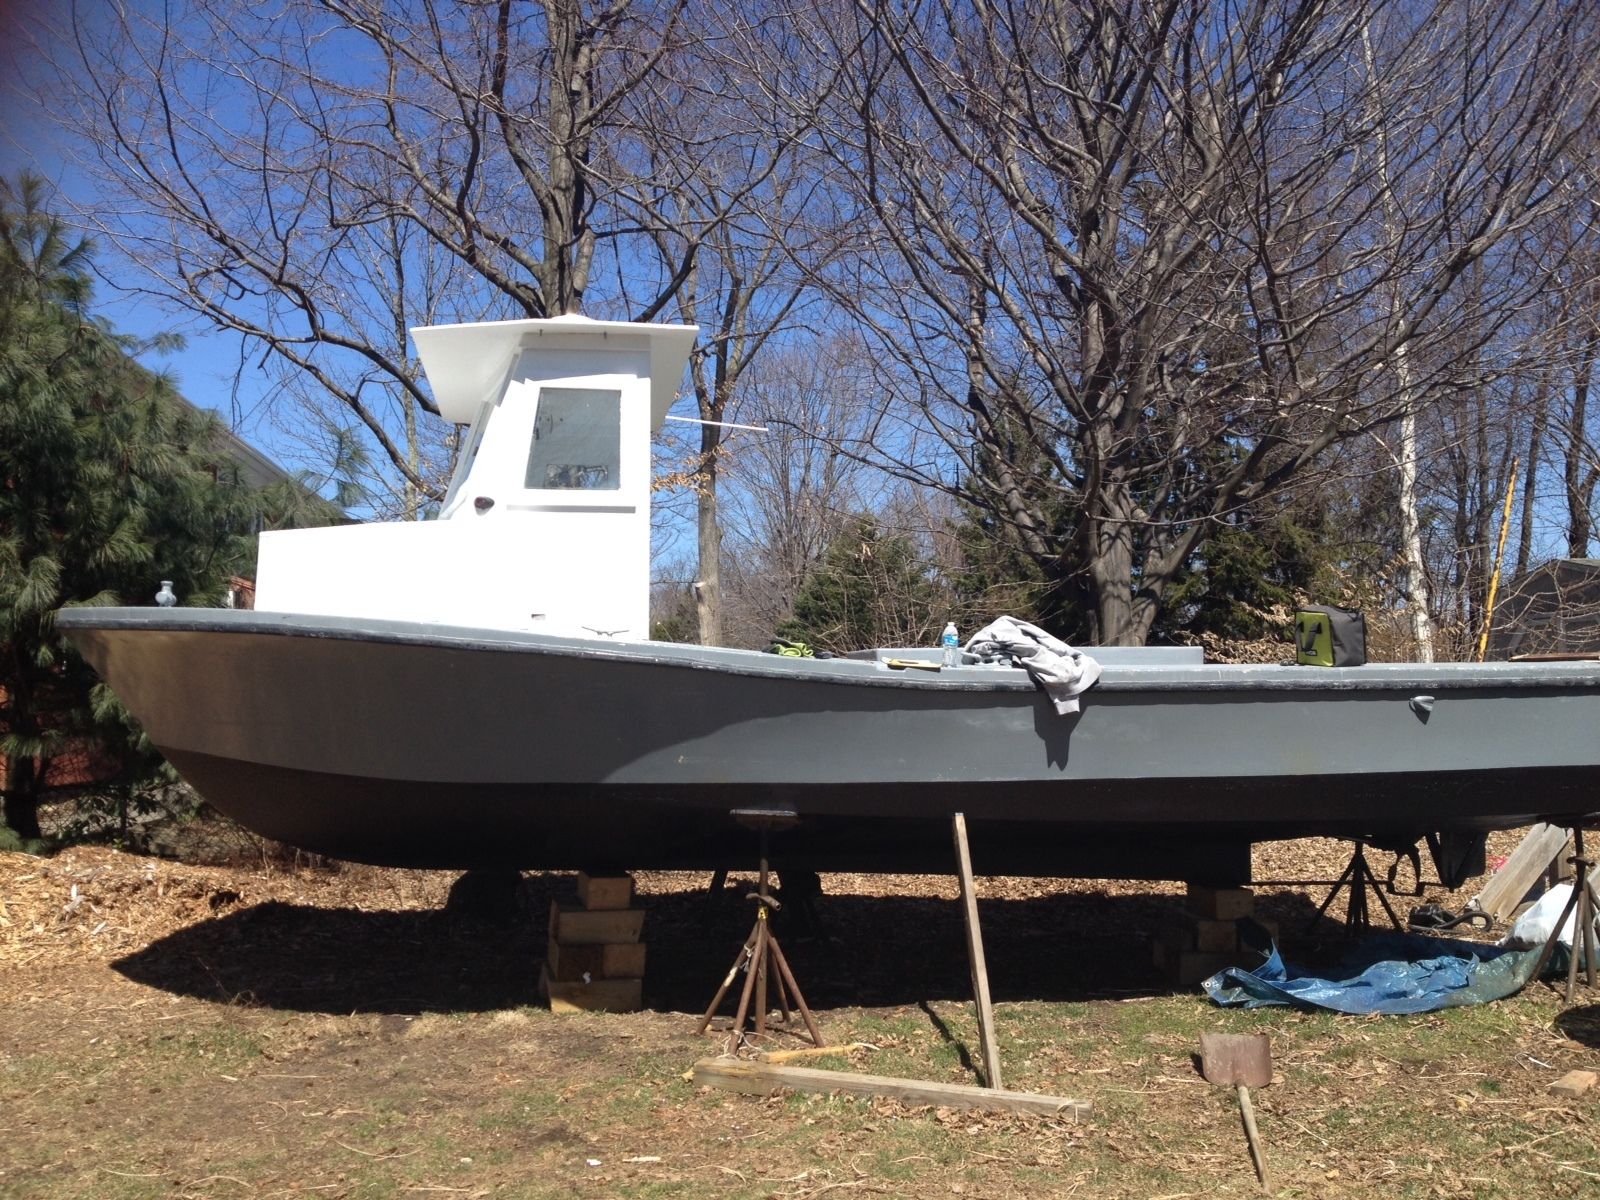 Privateer 1983 for sale for $7,500 - Boats-from-USA.com